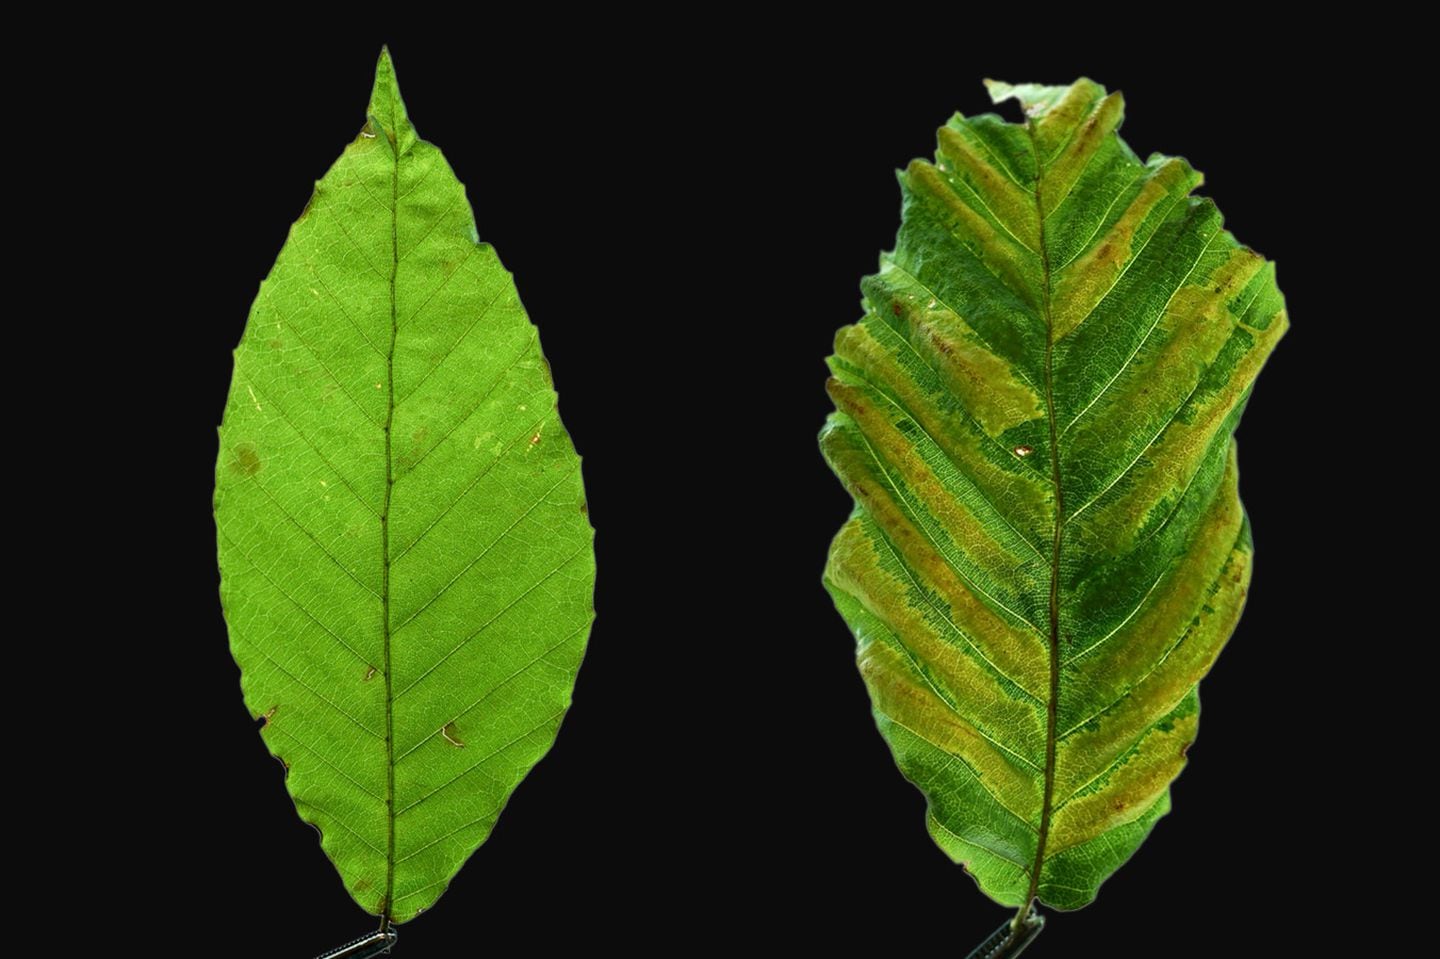 A healthy beech leaf on the left and one infected by the beech-killing worm on the right.